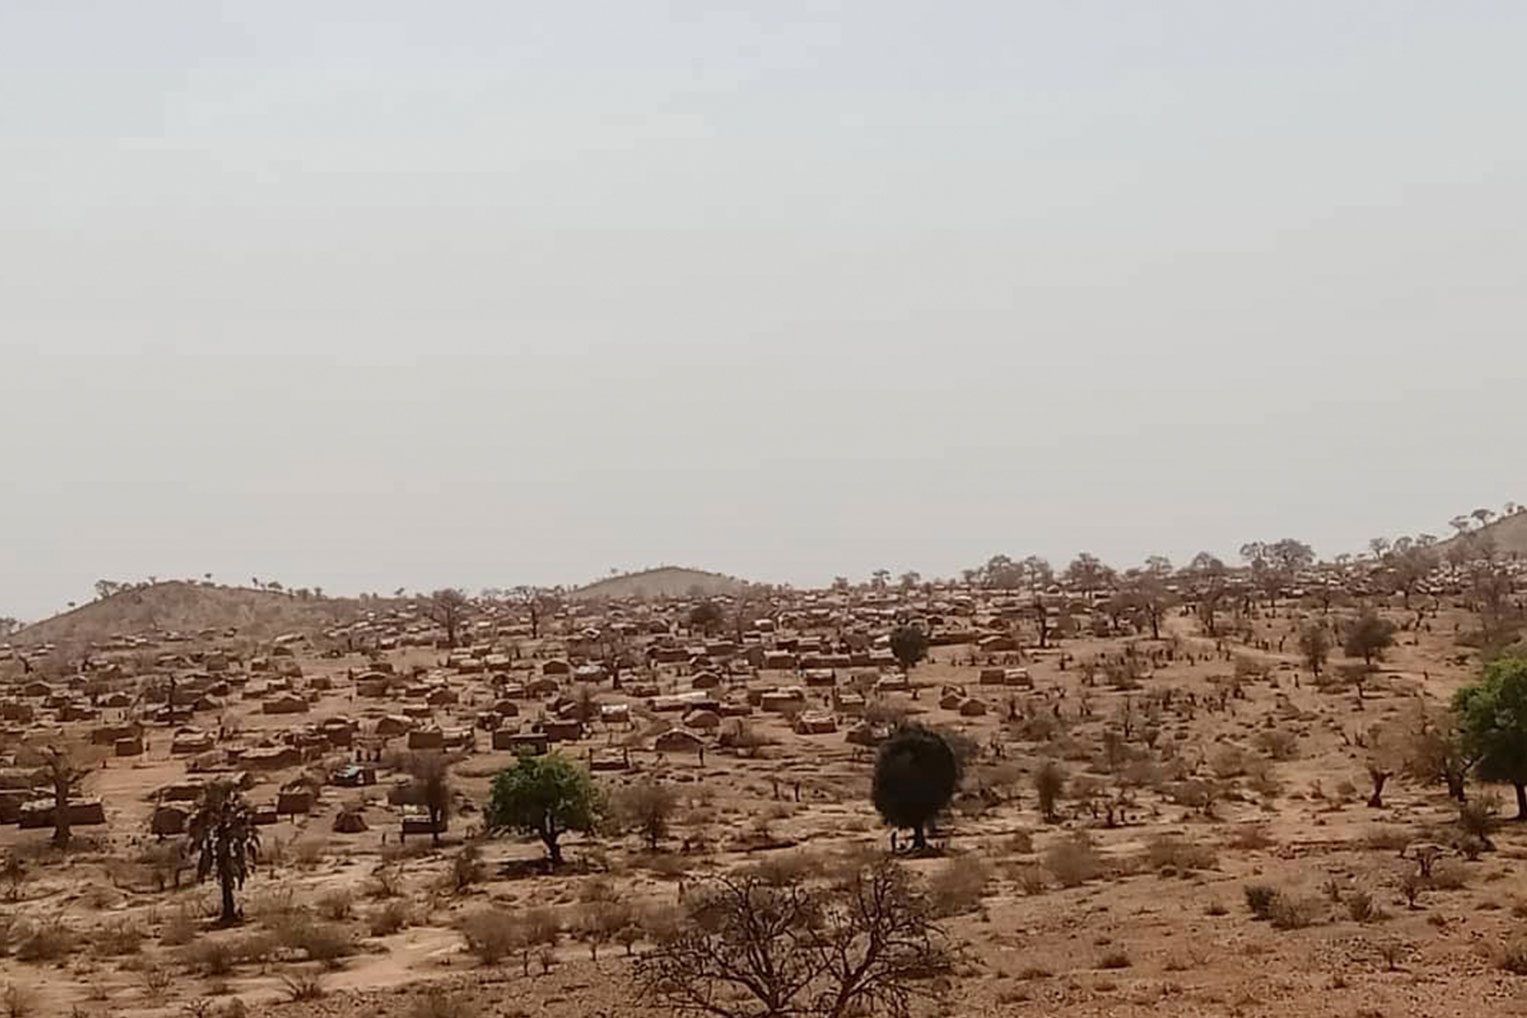 Families in South Kordofan are living in handmade dwelling scattered across the arid land.